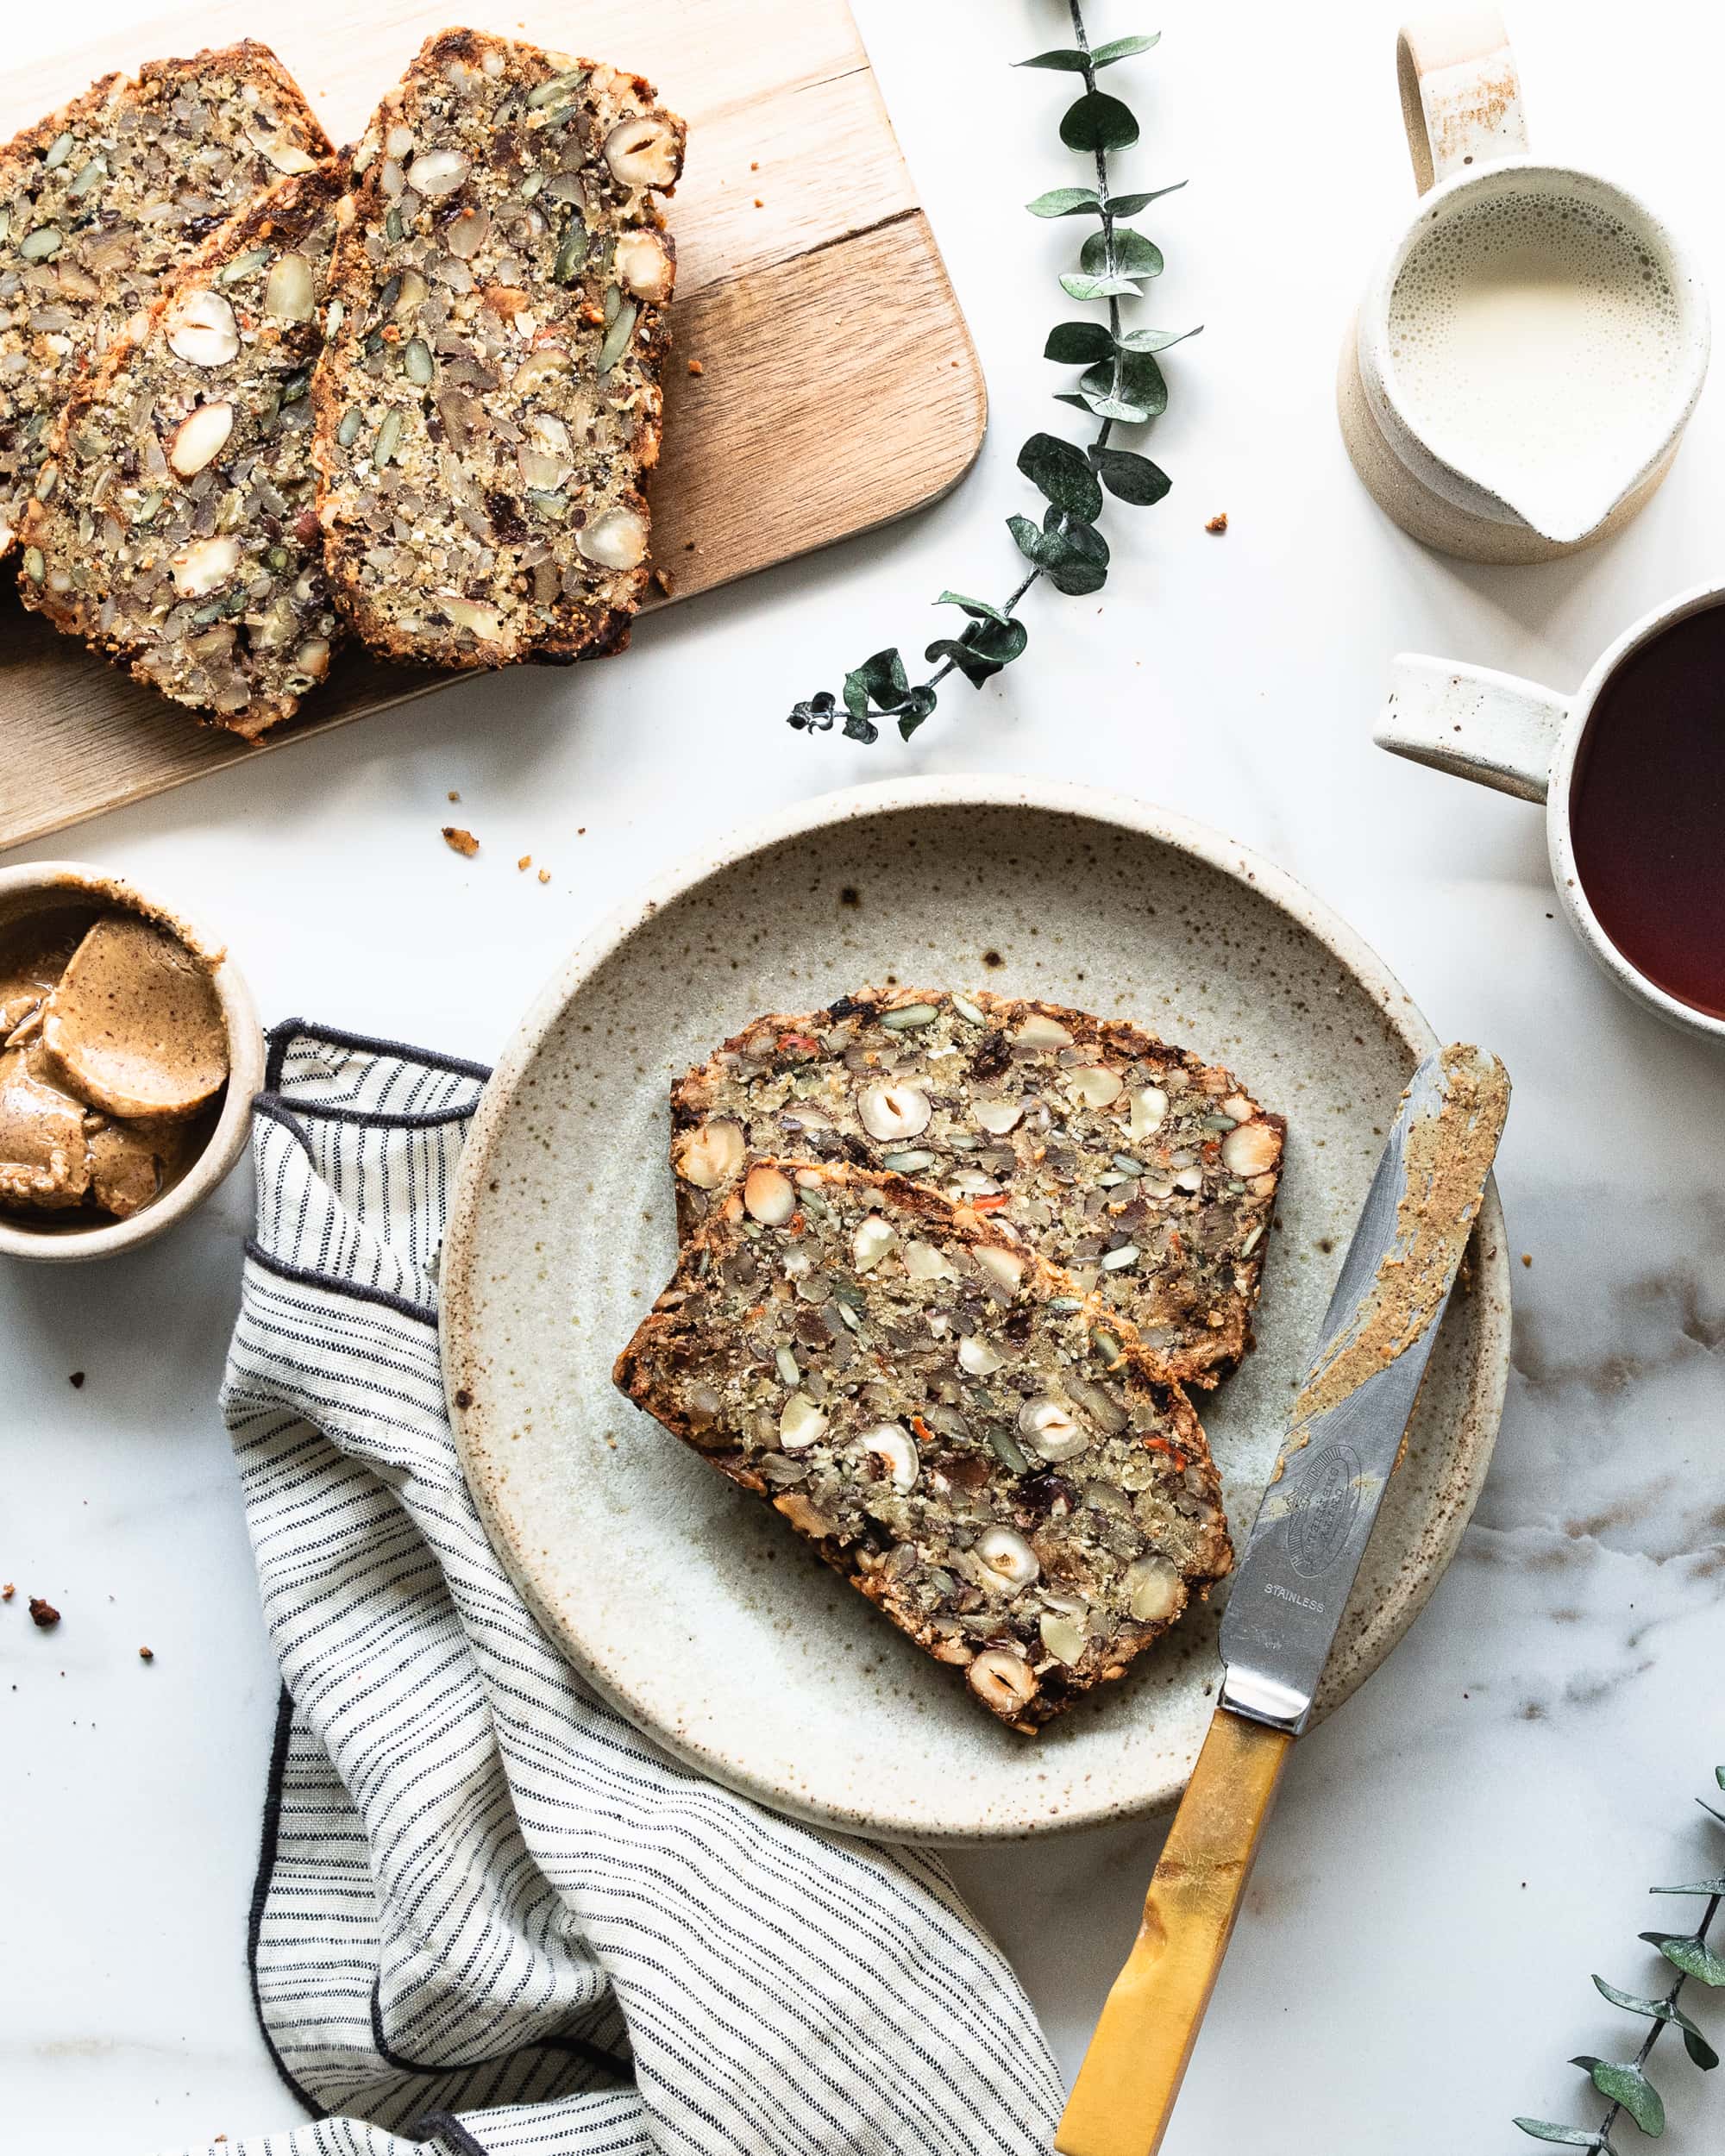 Nordic style super seedy & nutty loaf with figs | The Gut Health Doctor